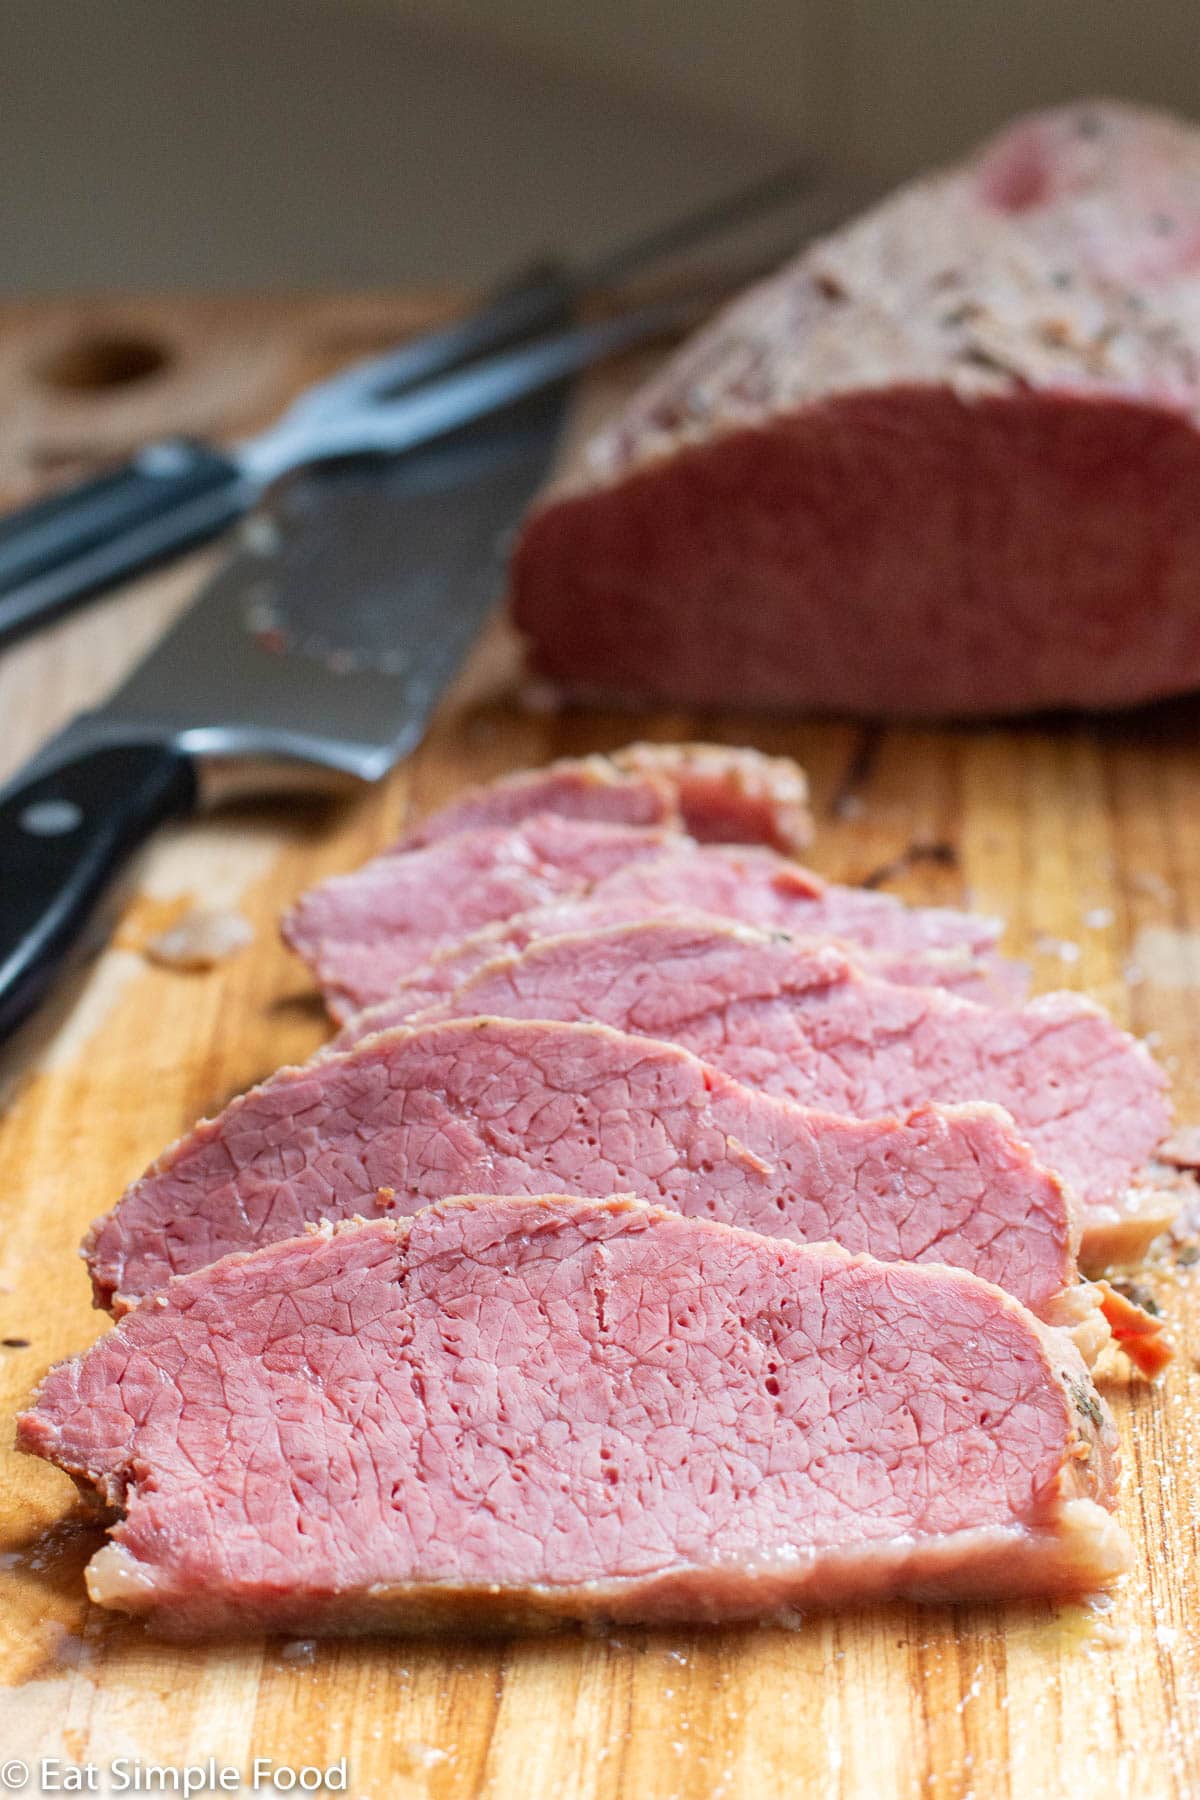 Side view of slices of think pink corned beef on a wood cutting board with a knife in the background.